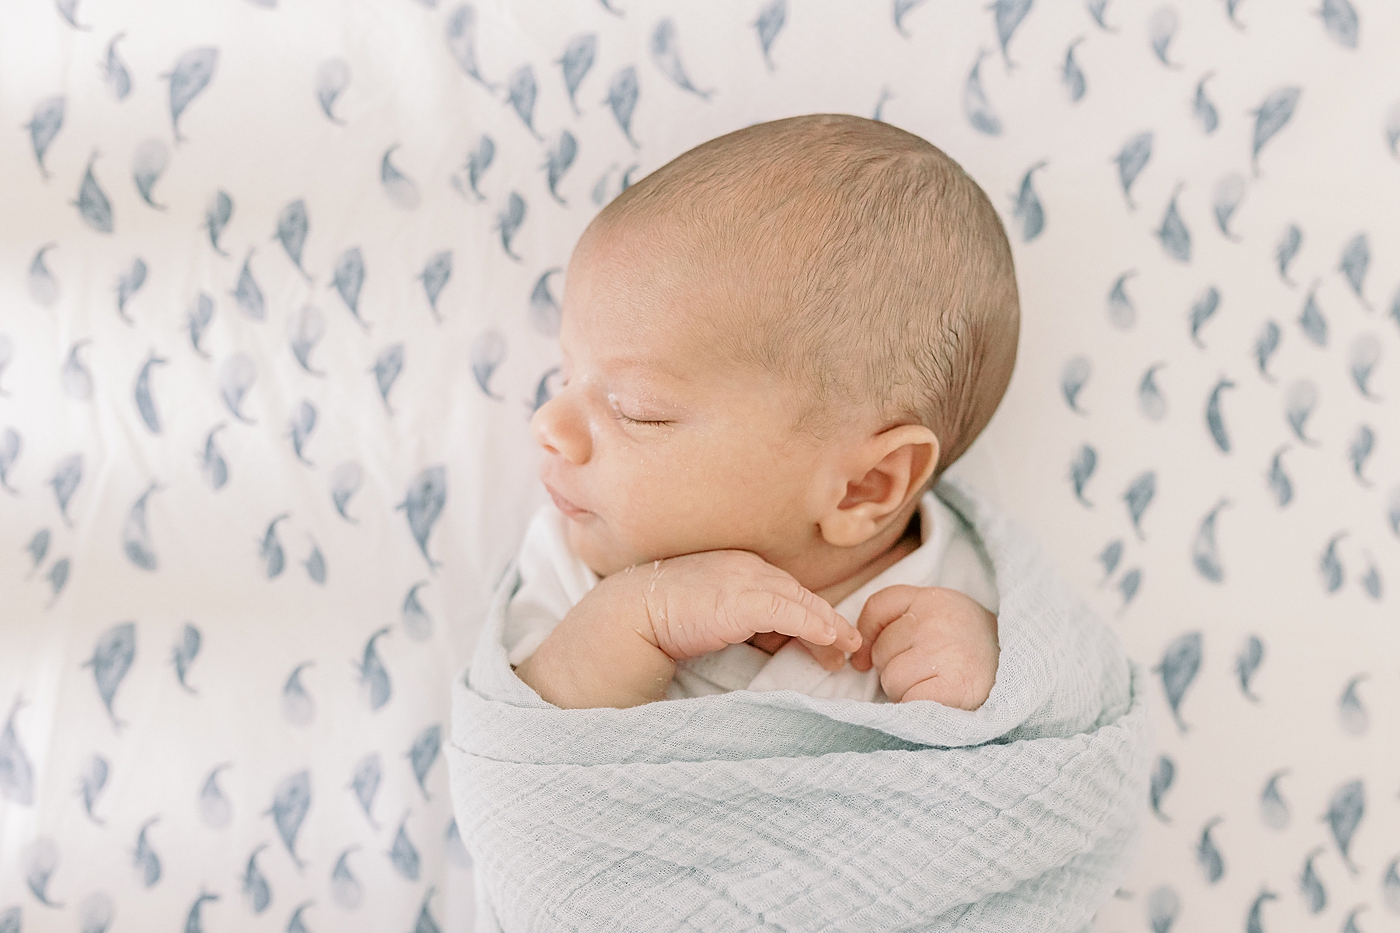 Newborn baby sleeping on whale sheets during lifestyle newborn photos | Image by Caitlyn Motycka